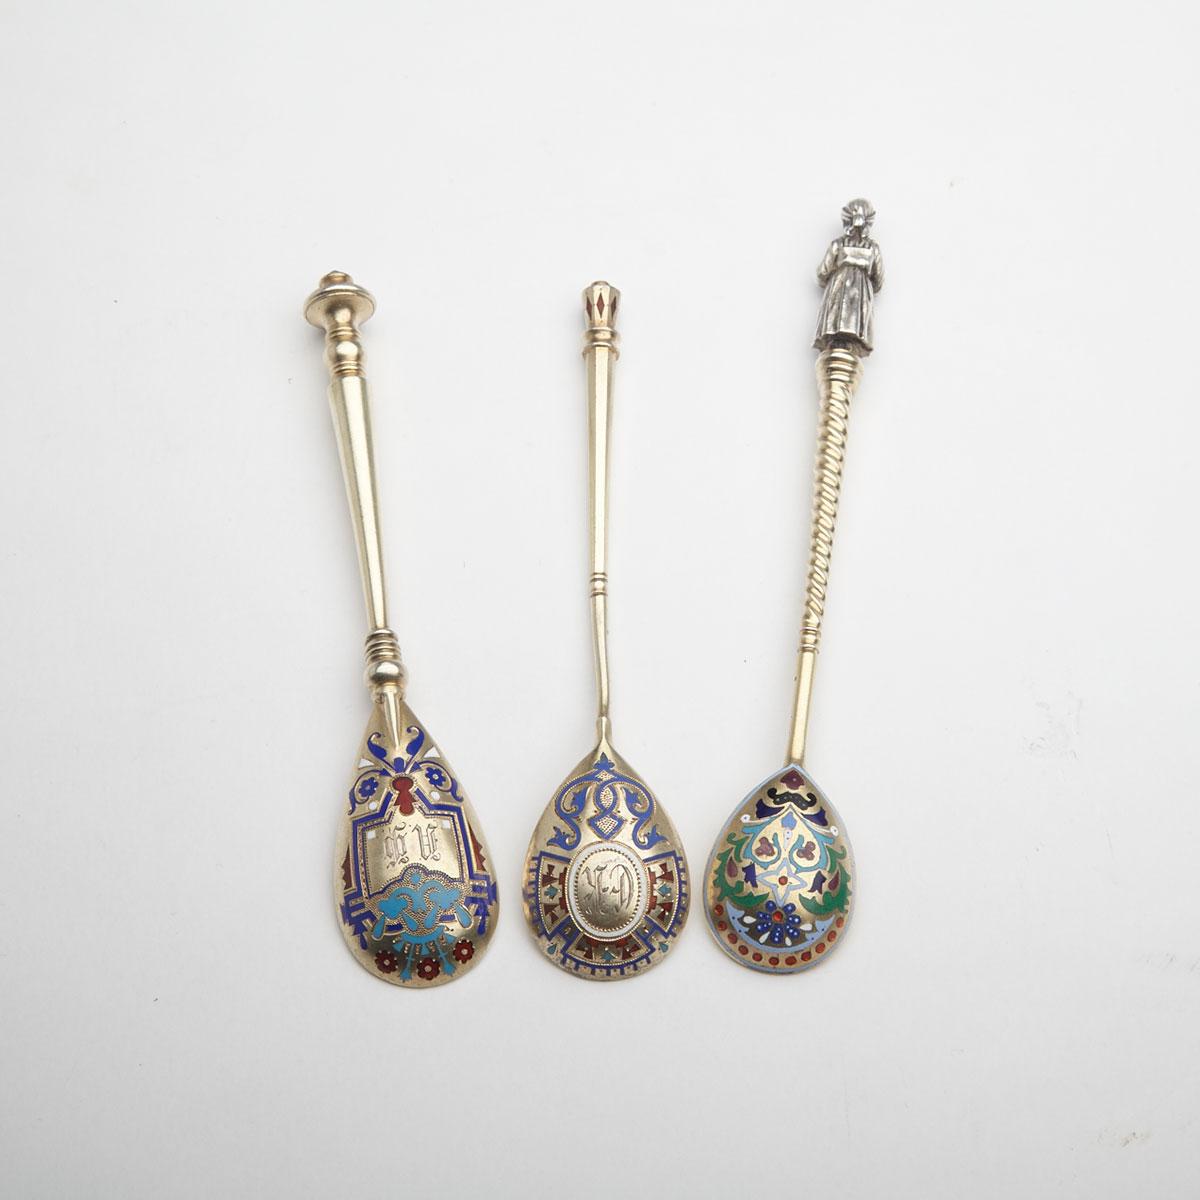 Three Russian Silver-Gilt and Champlevé Enamel Spoons, various makers, late 19th century